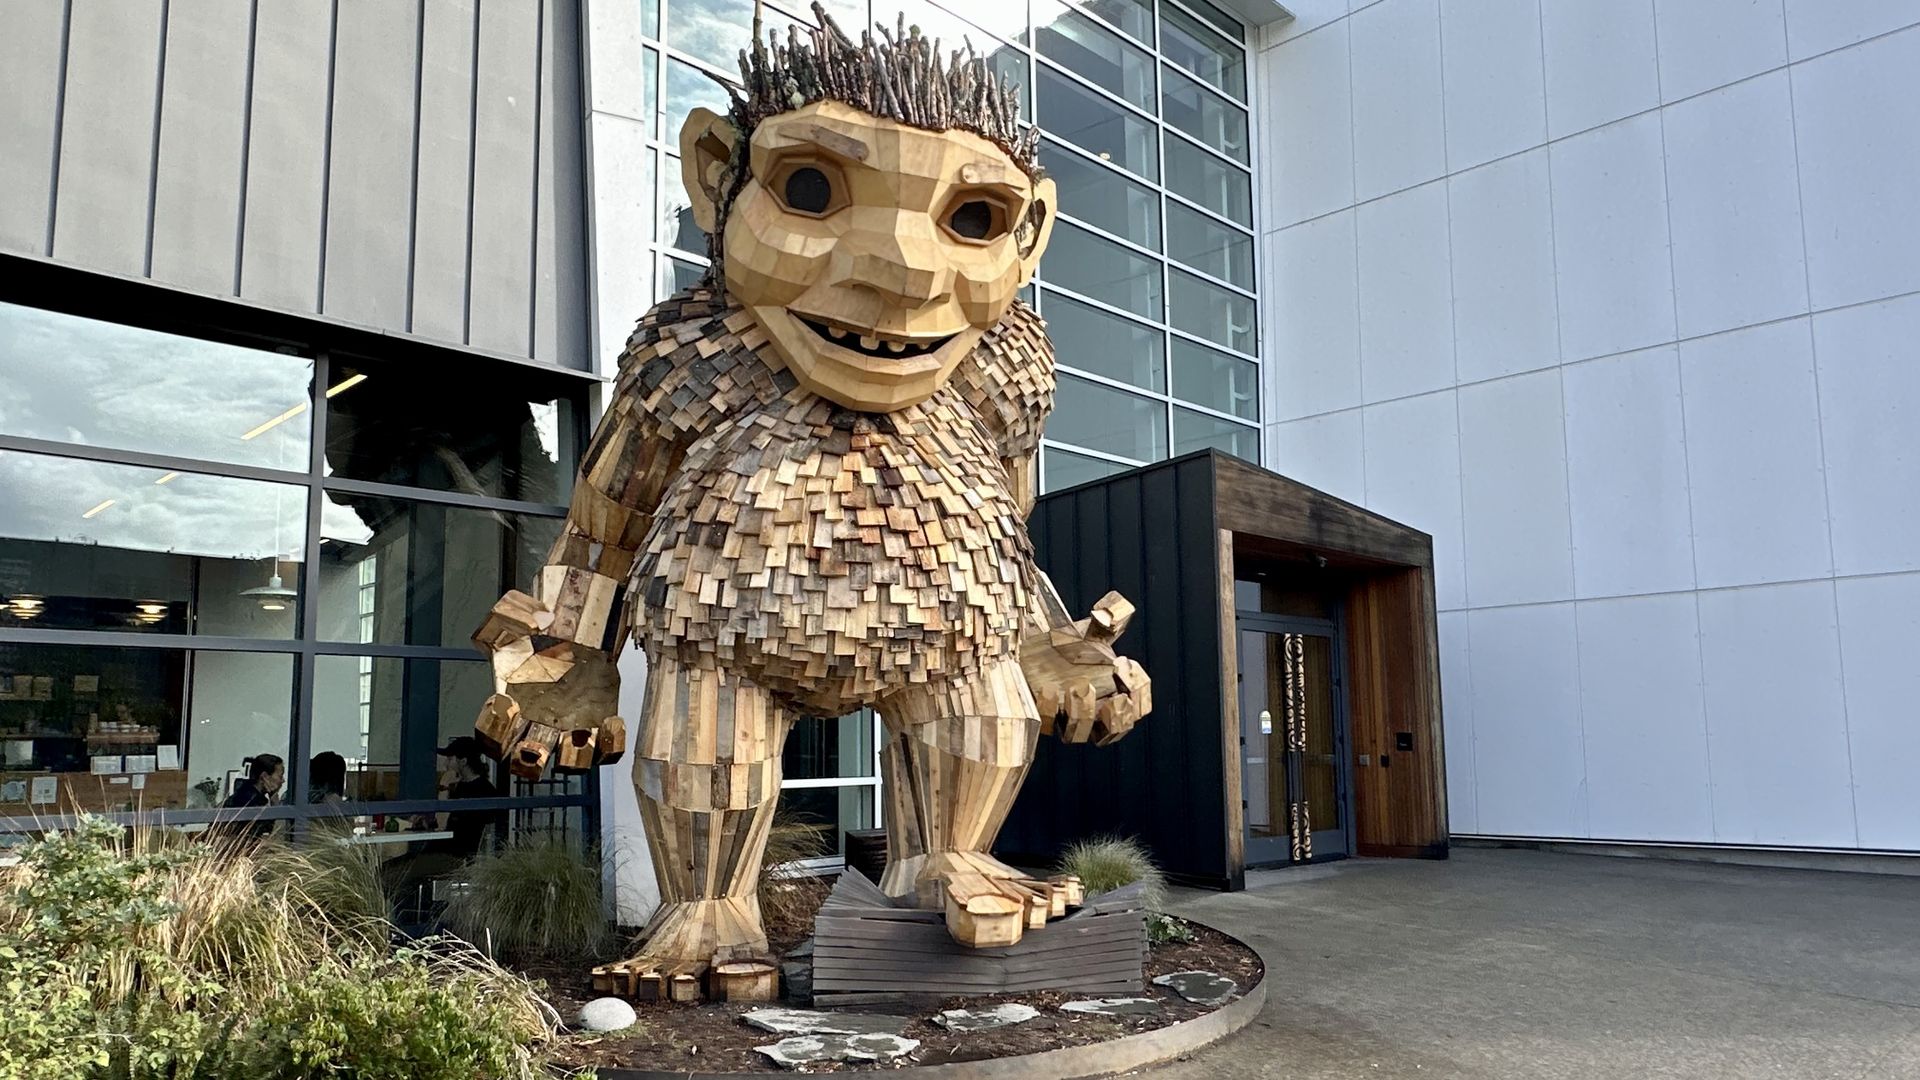 A troll made of wood and recycled materials stands far taller than the entrance of the National Nordic Museum in Ballard.